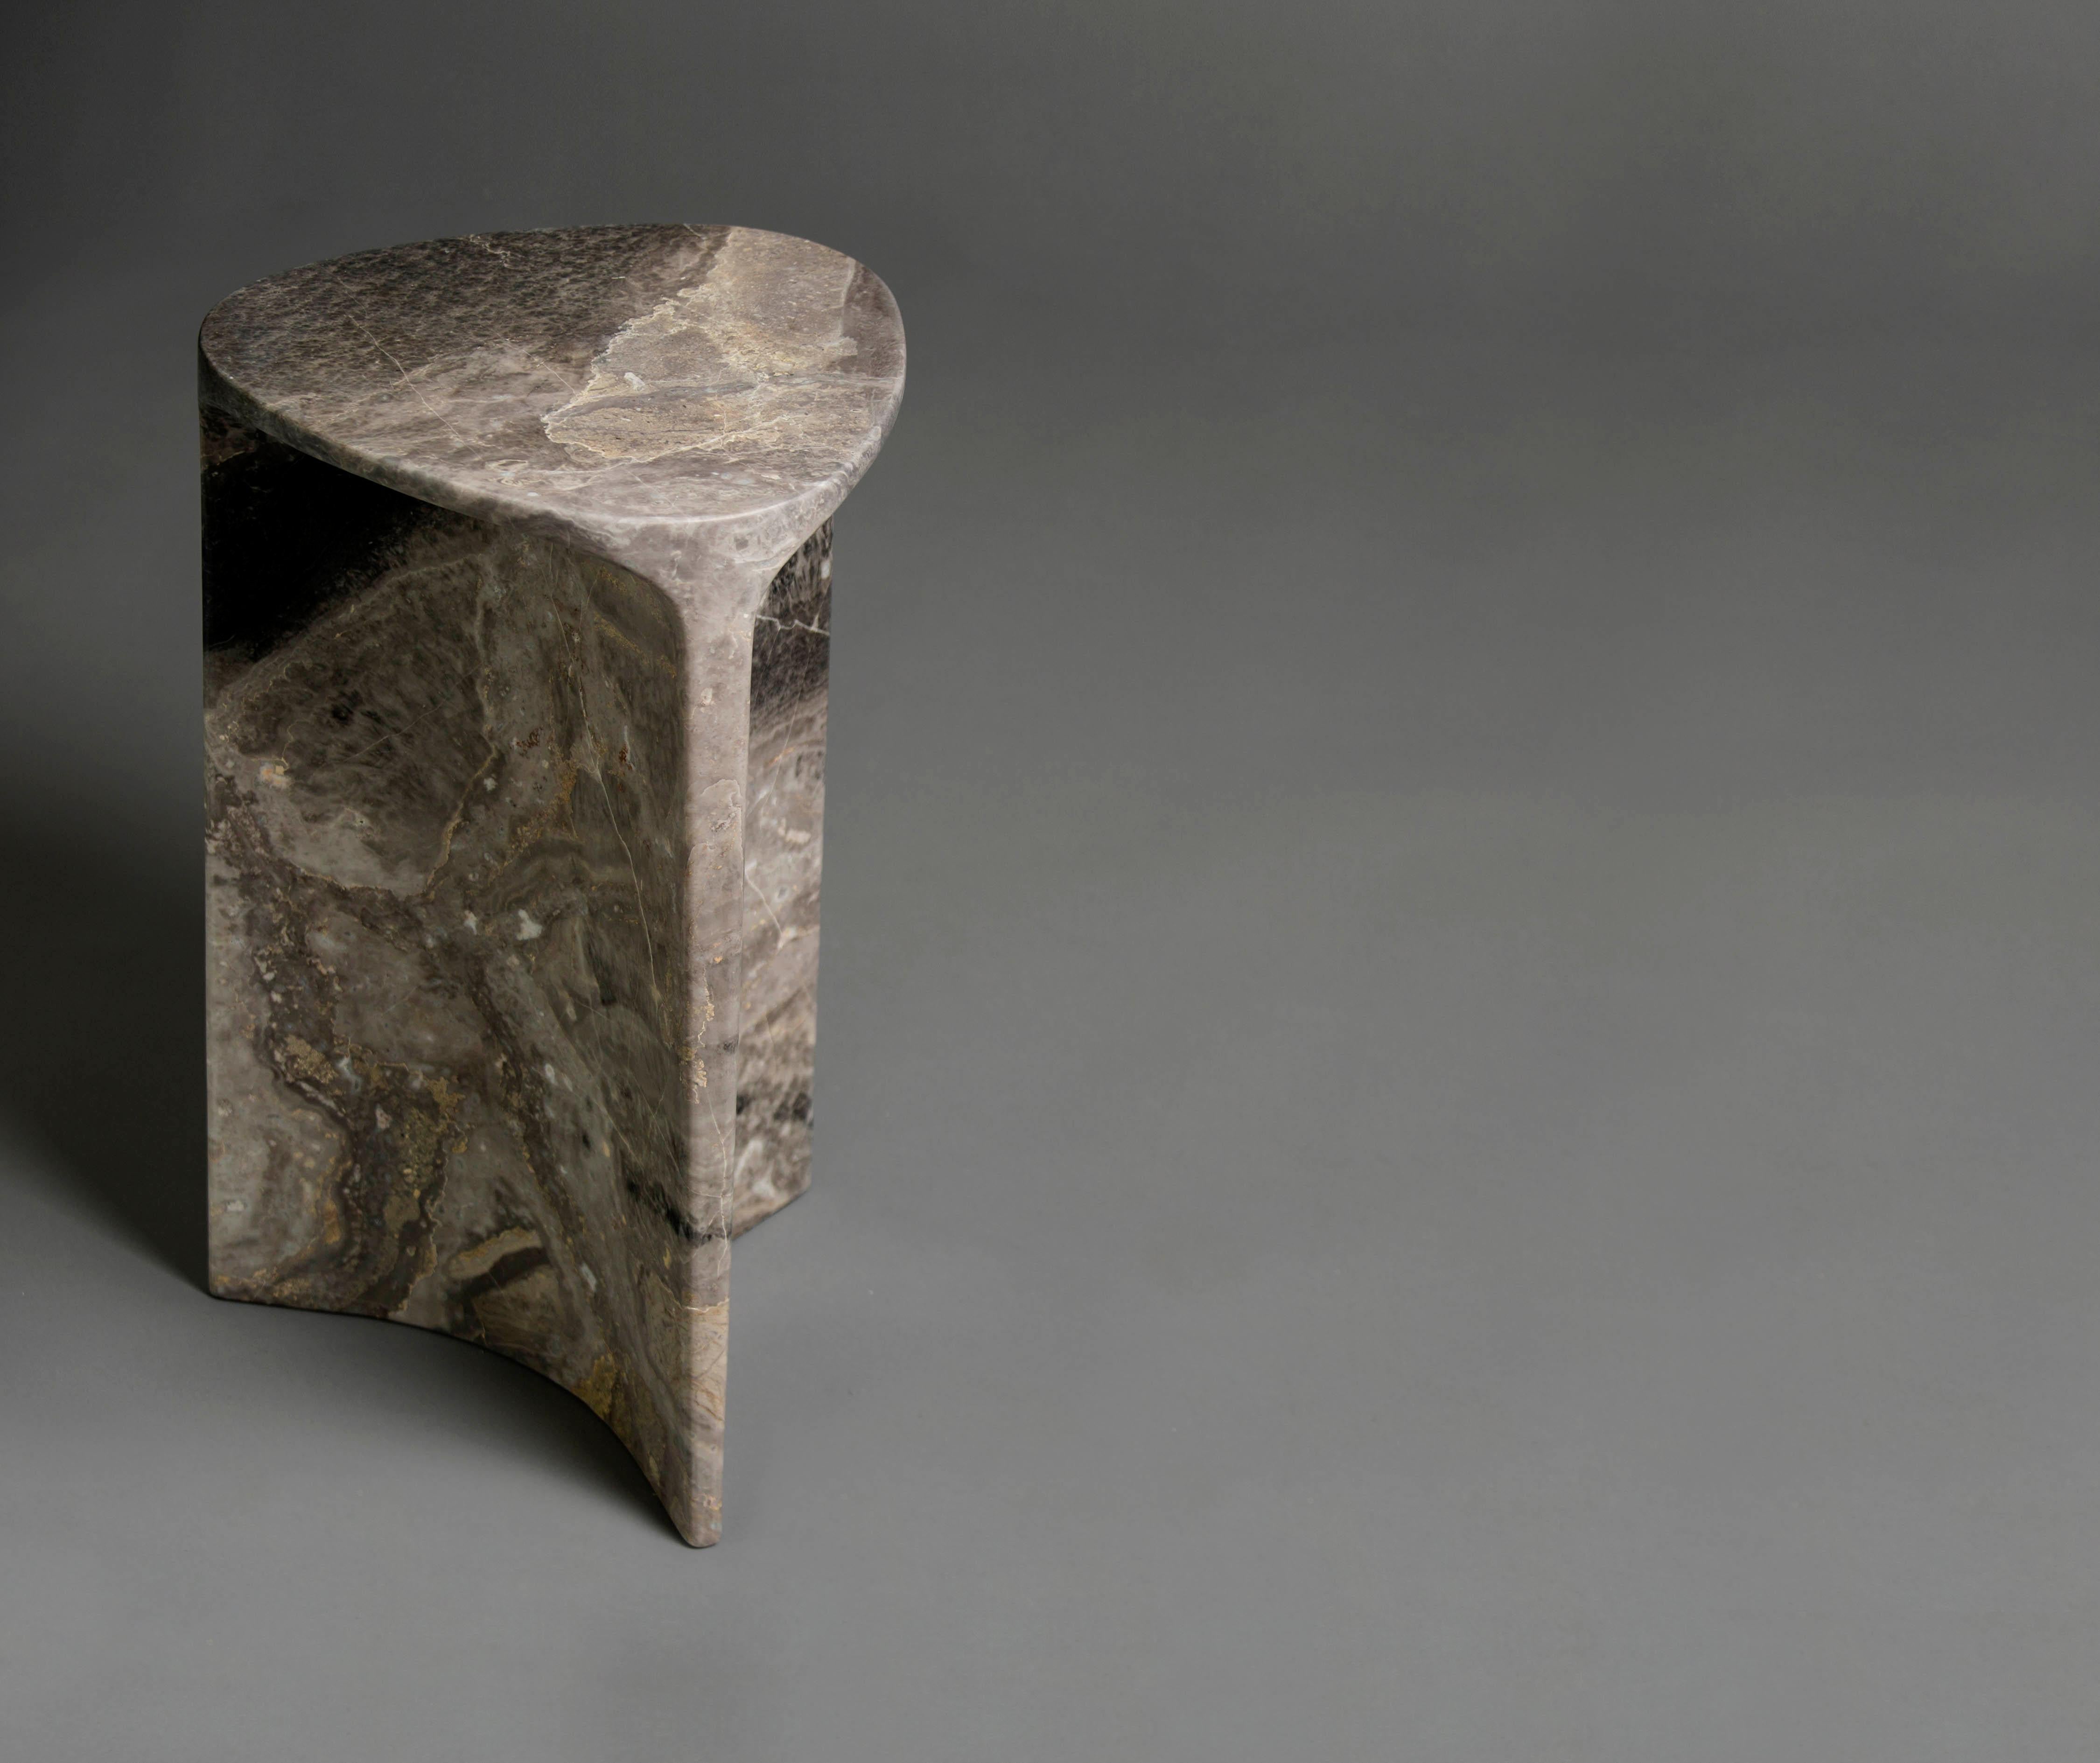 Carv occasional table is Cut from a single block of Italian Orobico marble.
Essential and organic design, naturally creating a flat tabletop flowing
to a Y - shaped foot, revealing the stone’s veins
from the exterior surface through to it’s